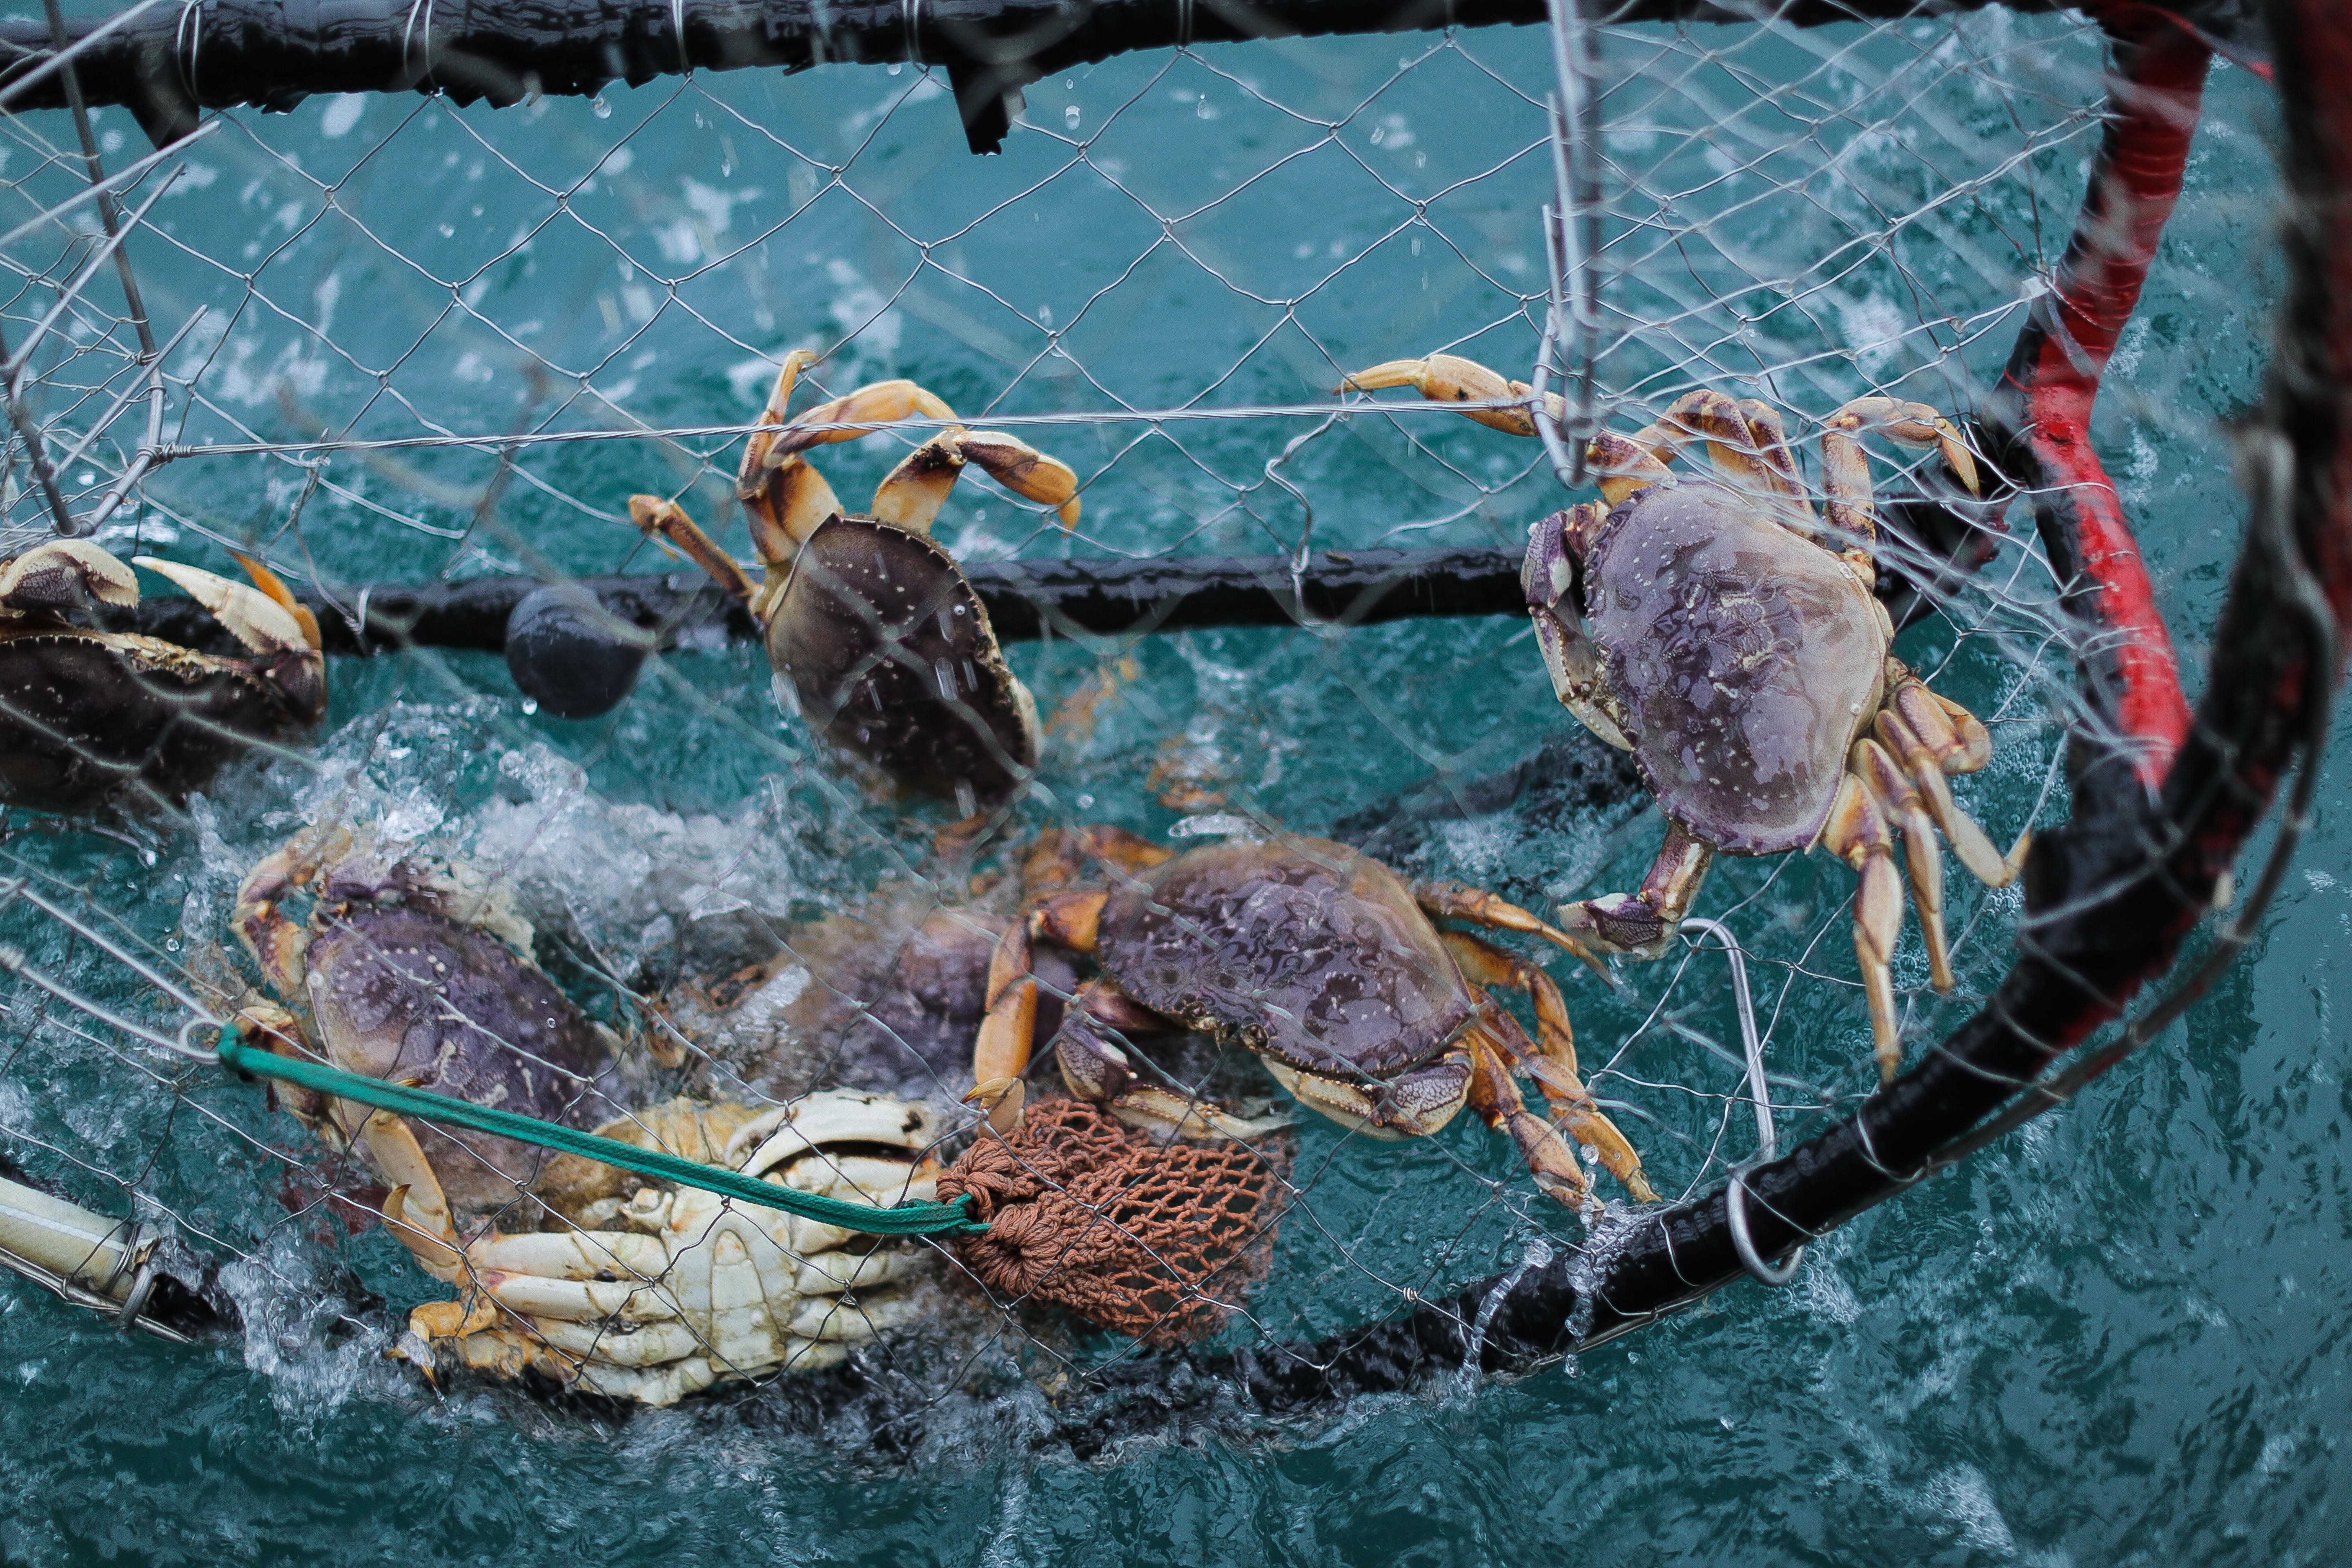 New Crab Pot Could Help Reduce Whale Entanglements - OPB